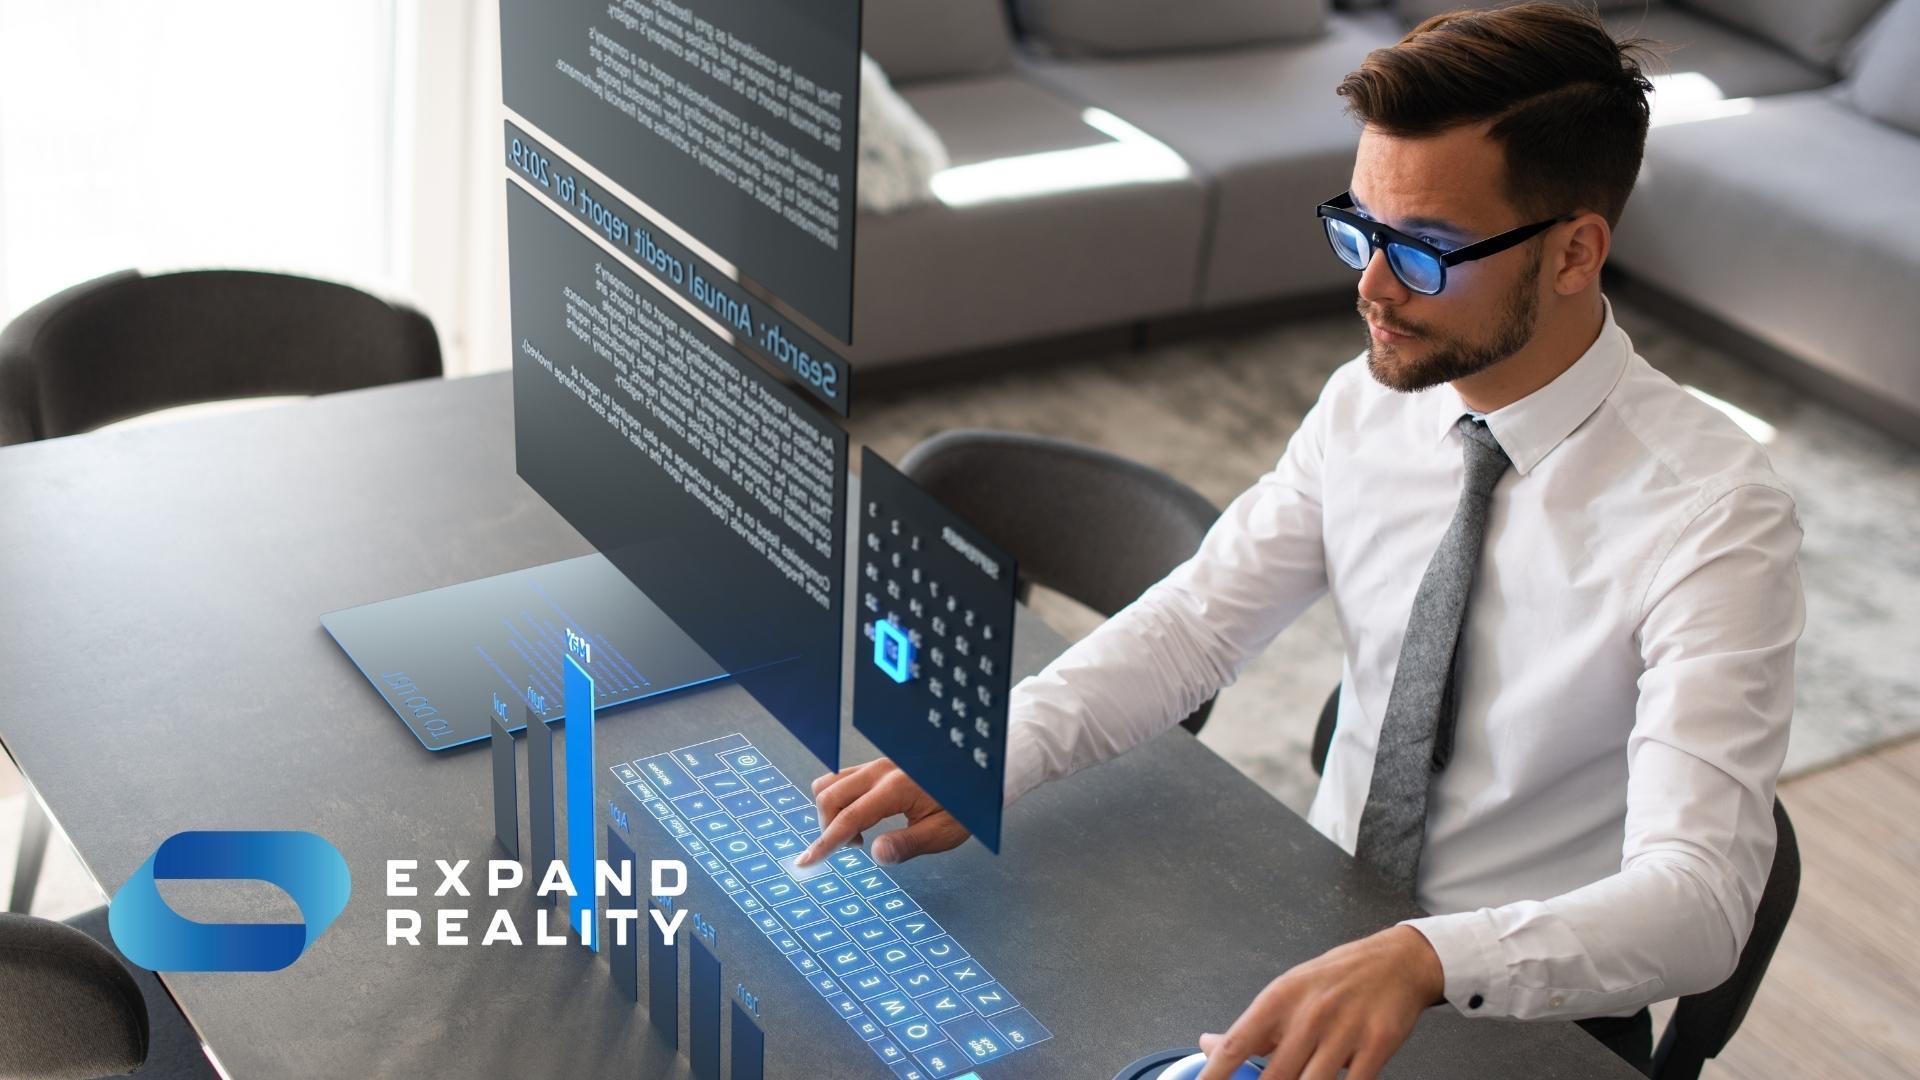 Augmented reality is a transformative technology that's already broken the mainstream. It's also making waves in the world of business. Learn more inside.